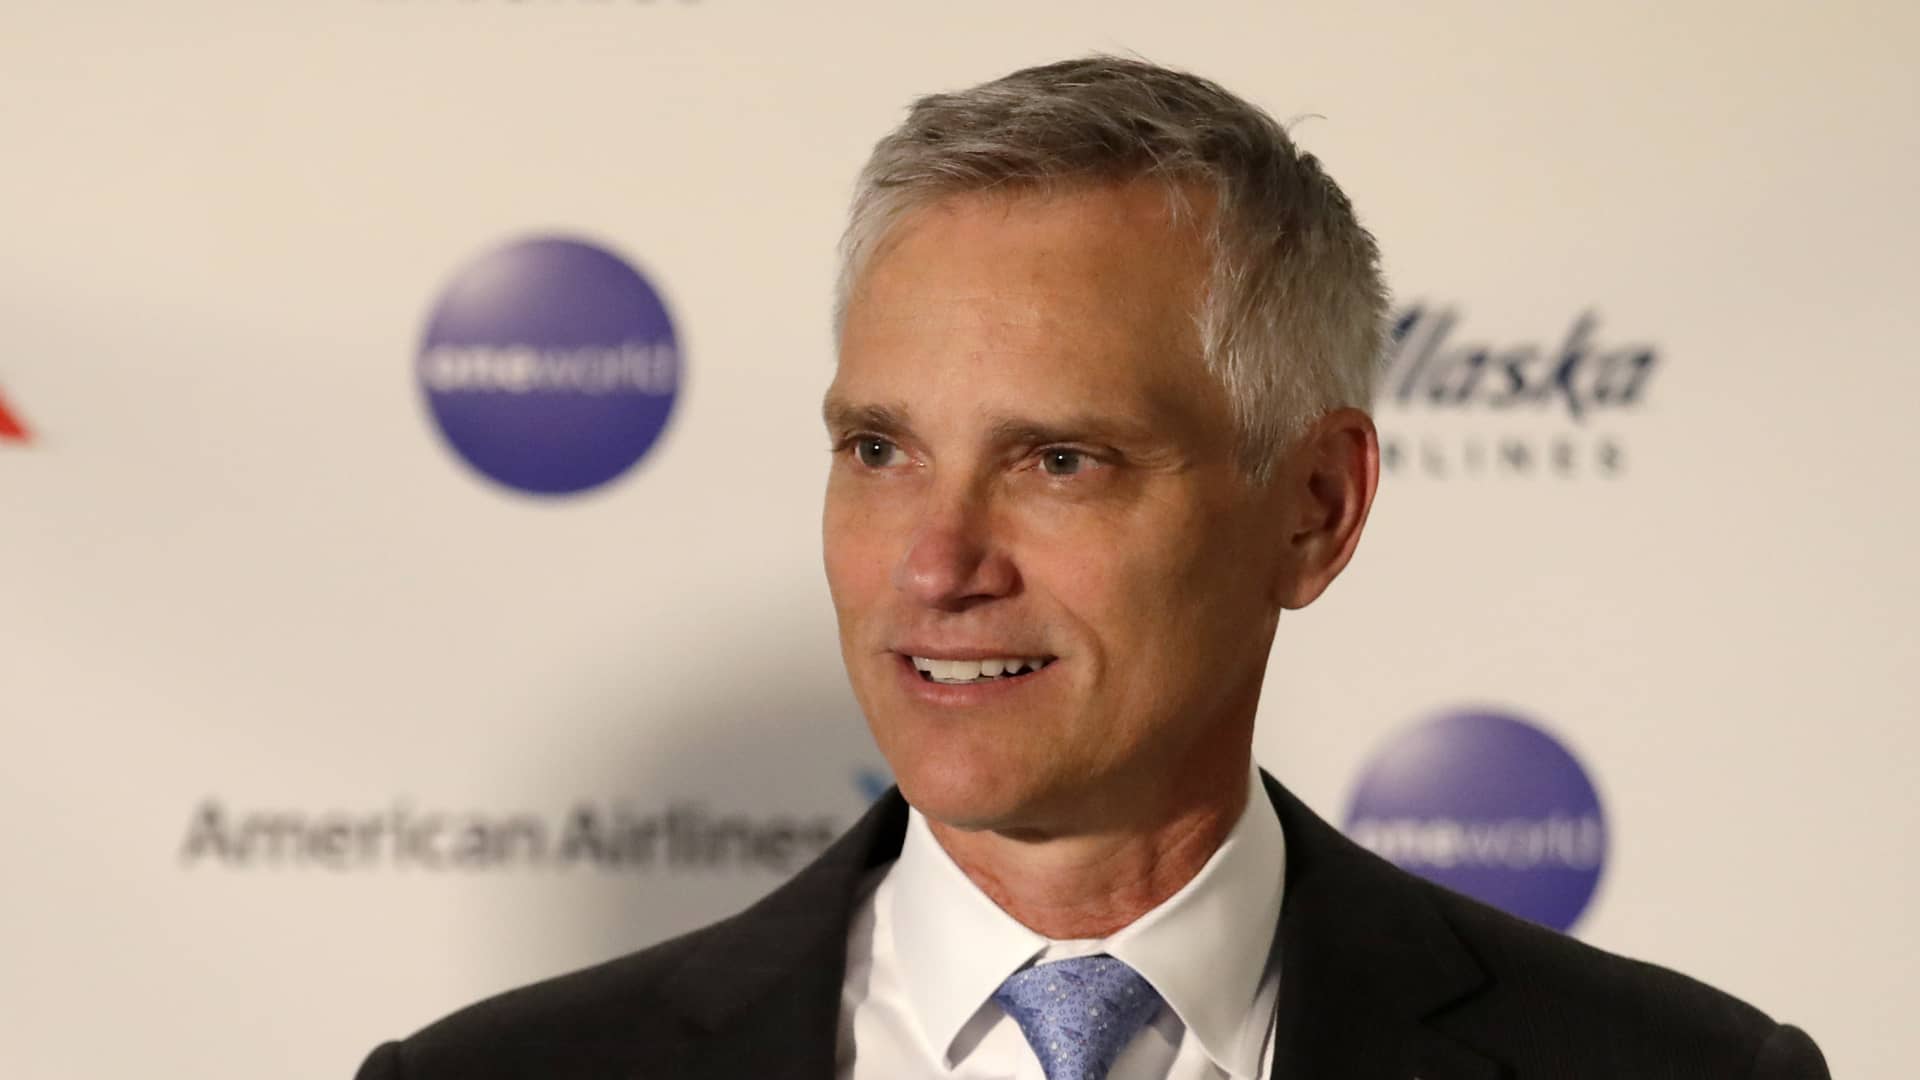 American Airlines CEO tells pilots the carrier will match Delta’s pay